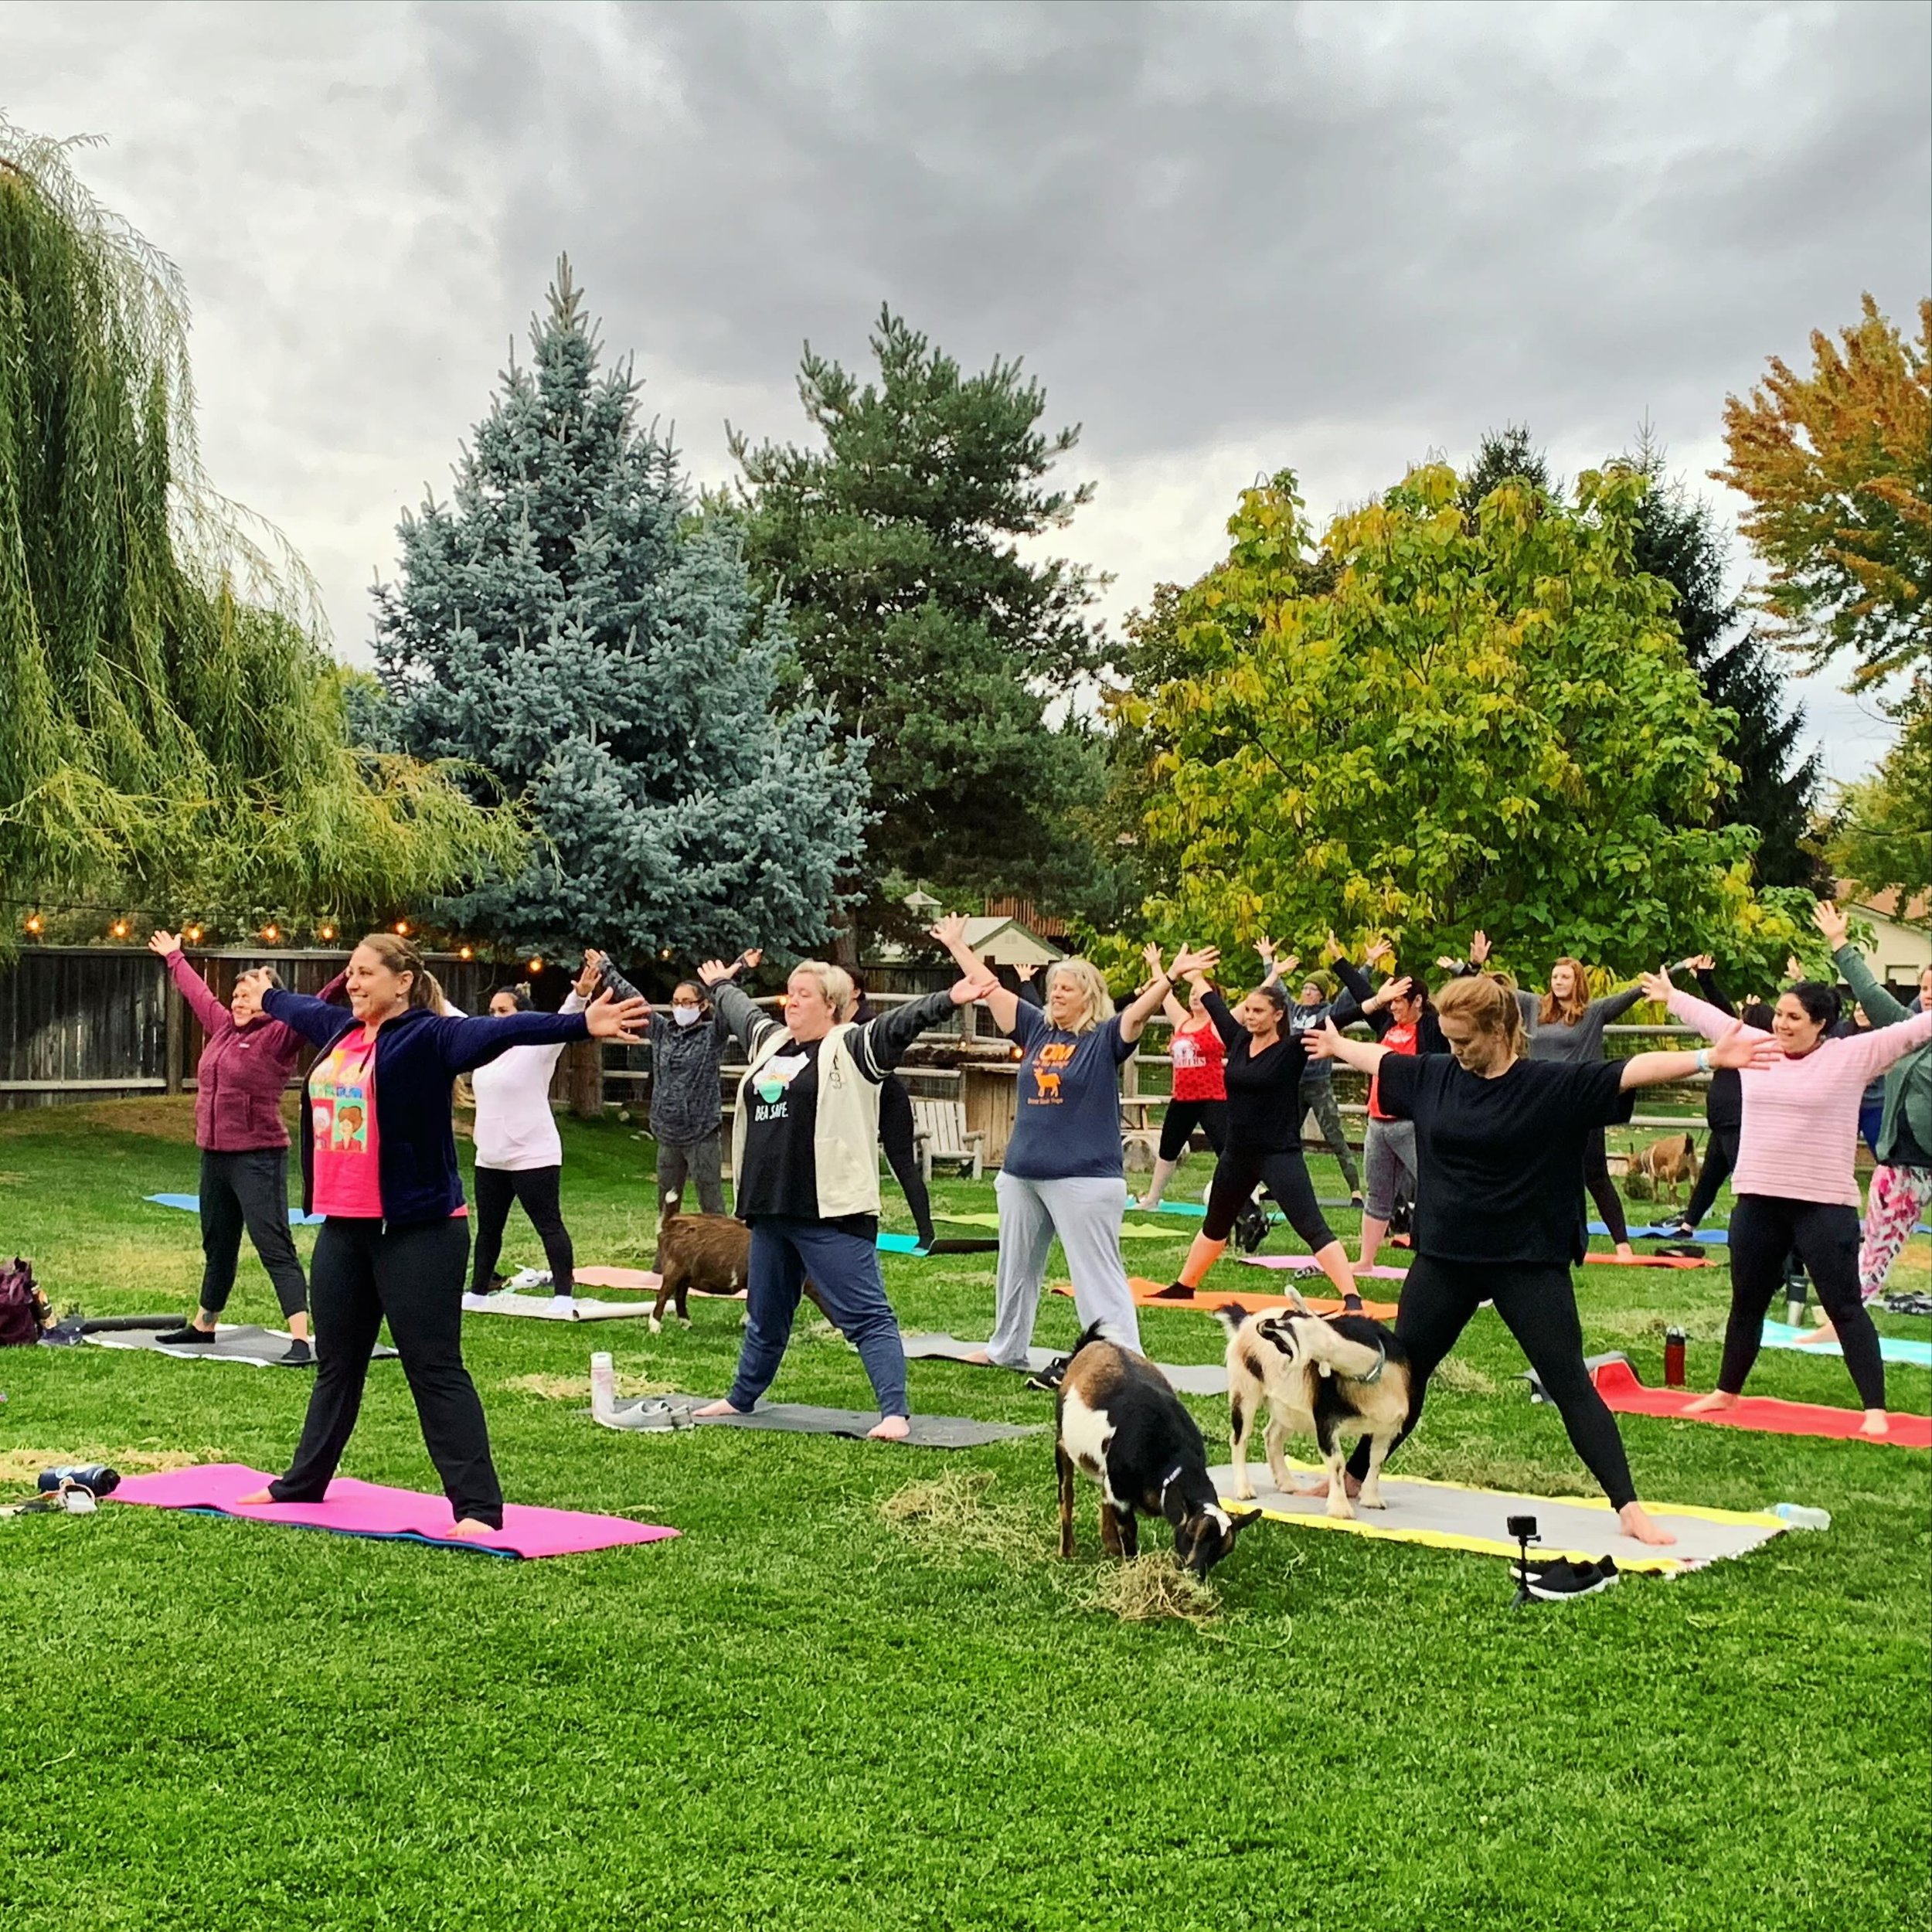 What do you love most about outdoor yoga with goats?

1️⃣ a chance to be lighthearted 

2️⃣ a chance to move my body 

3️⃣ I&rsquo;m just here for the goats 

4️⃣ all of the above! 

The season opener of Boise Goat Yoga is on April 21 and spots are a